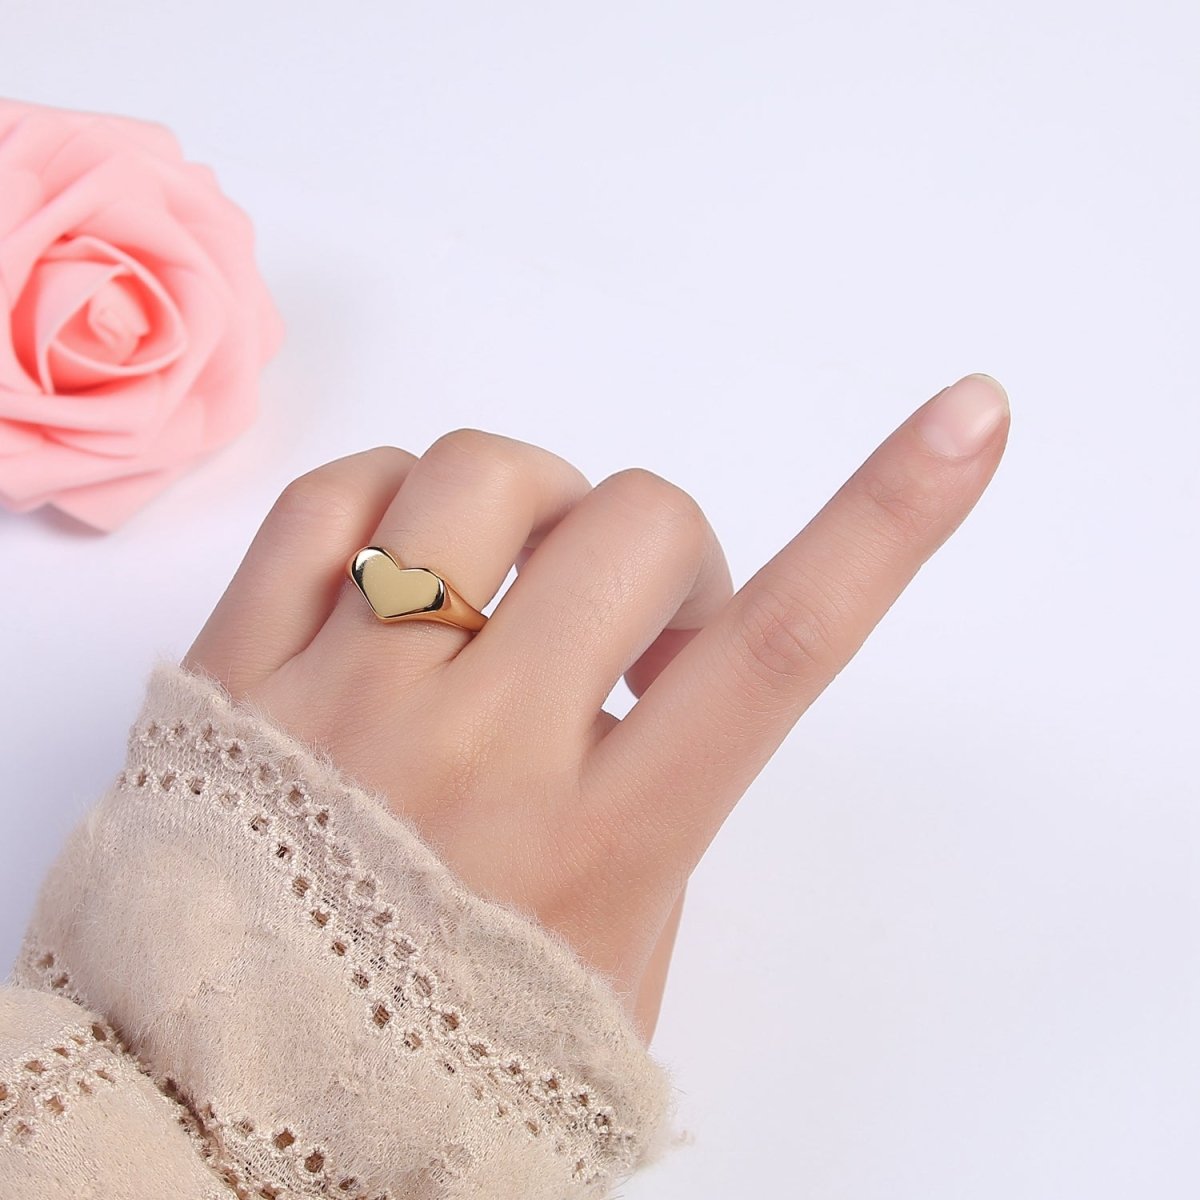 Heart Signet Ring, Heart Ring, Chunky Ring, Statement Ring, Gold Signet Ring, Dainty Ring, Minimalist Ring, Stacking Ring U-491 - DLUXCA